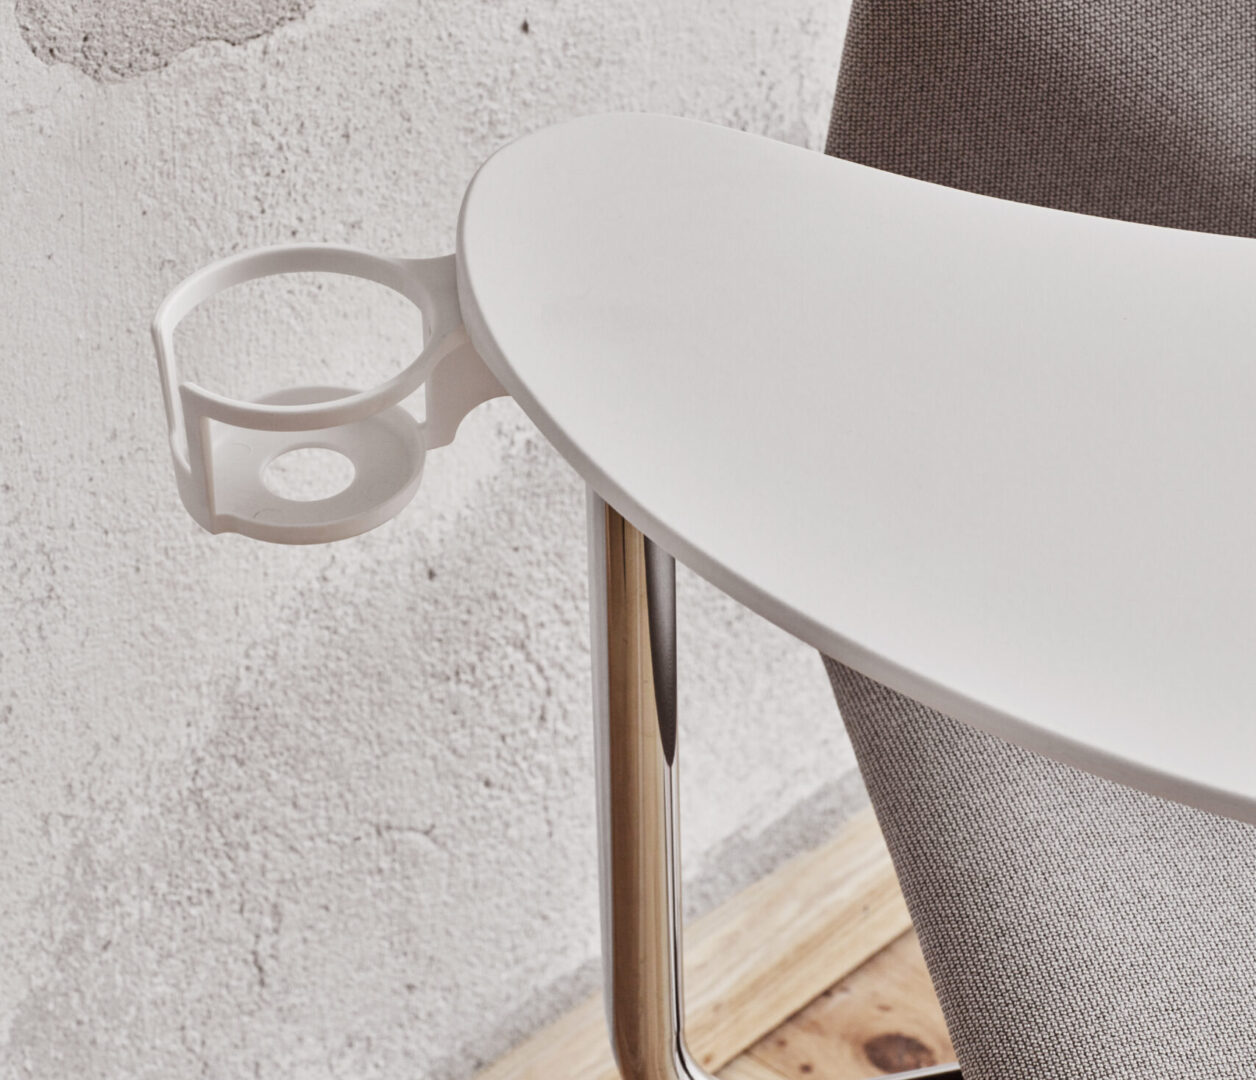 OCEE&FOUR – Chairs – FourCast 2 Lounge – Details Image 1